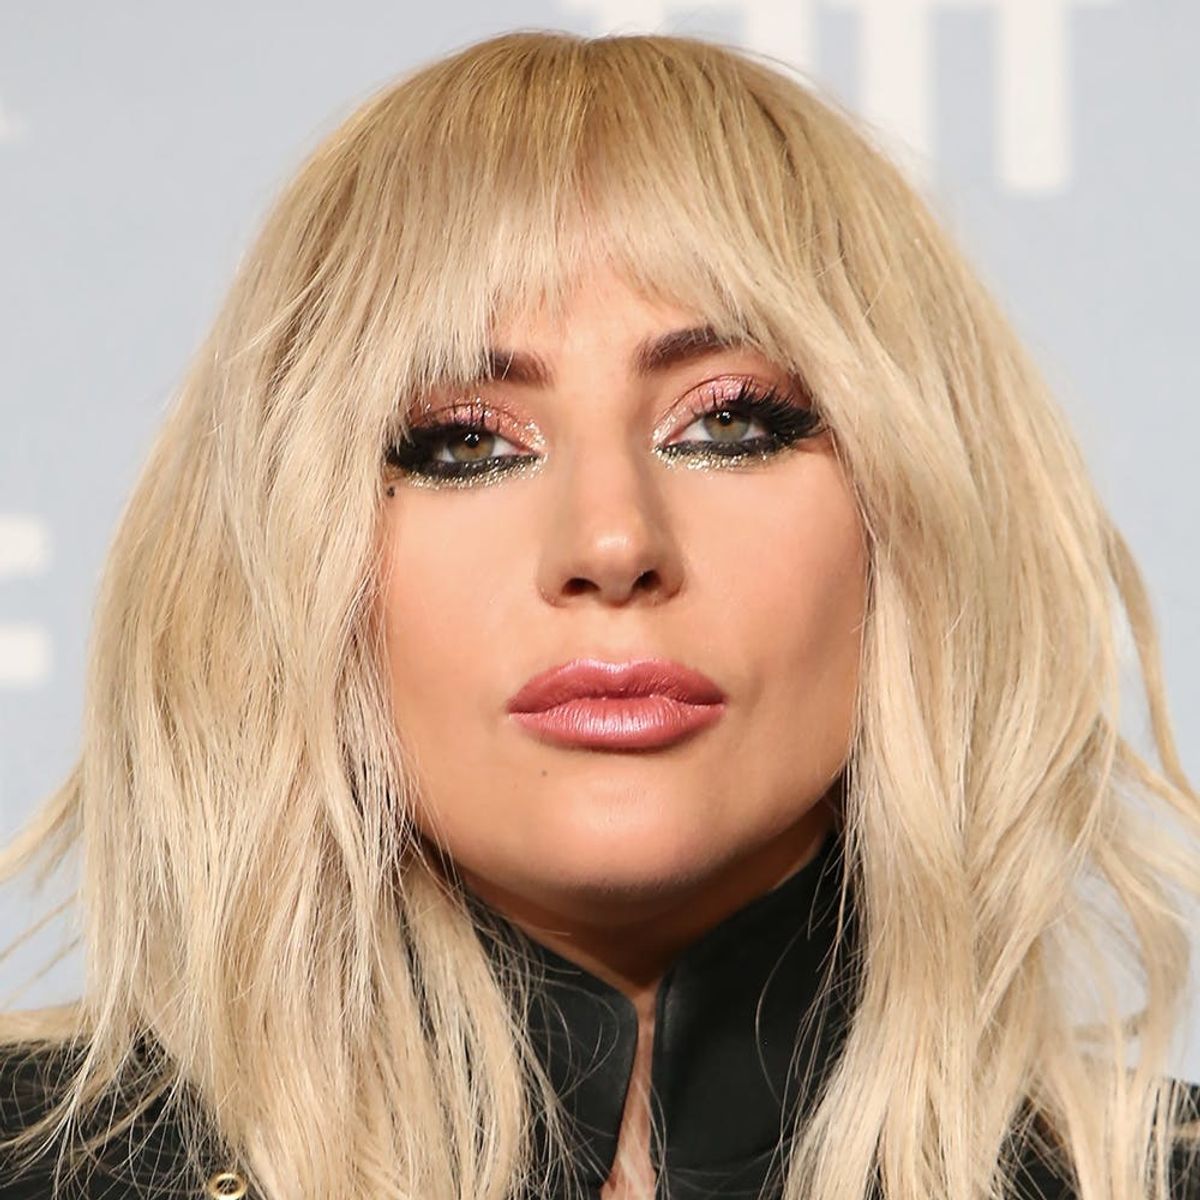 Lady Gaga Is FINALLY Opening Up About Her Split With Taylor Kinney